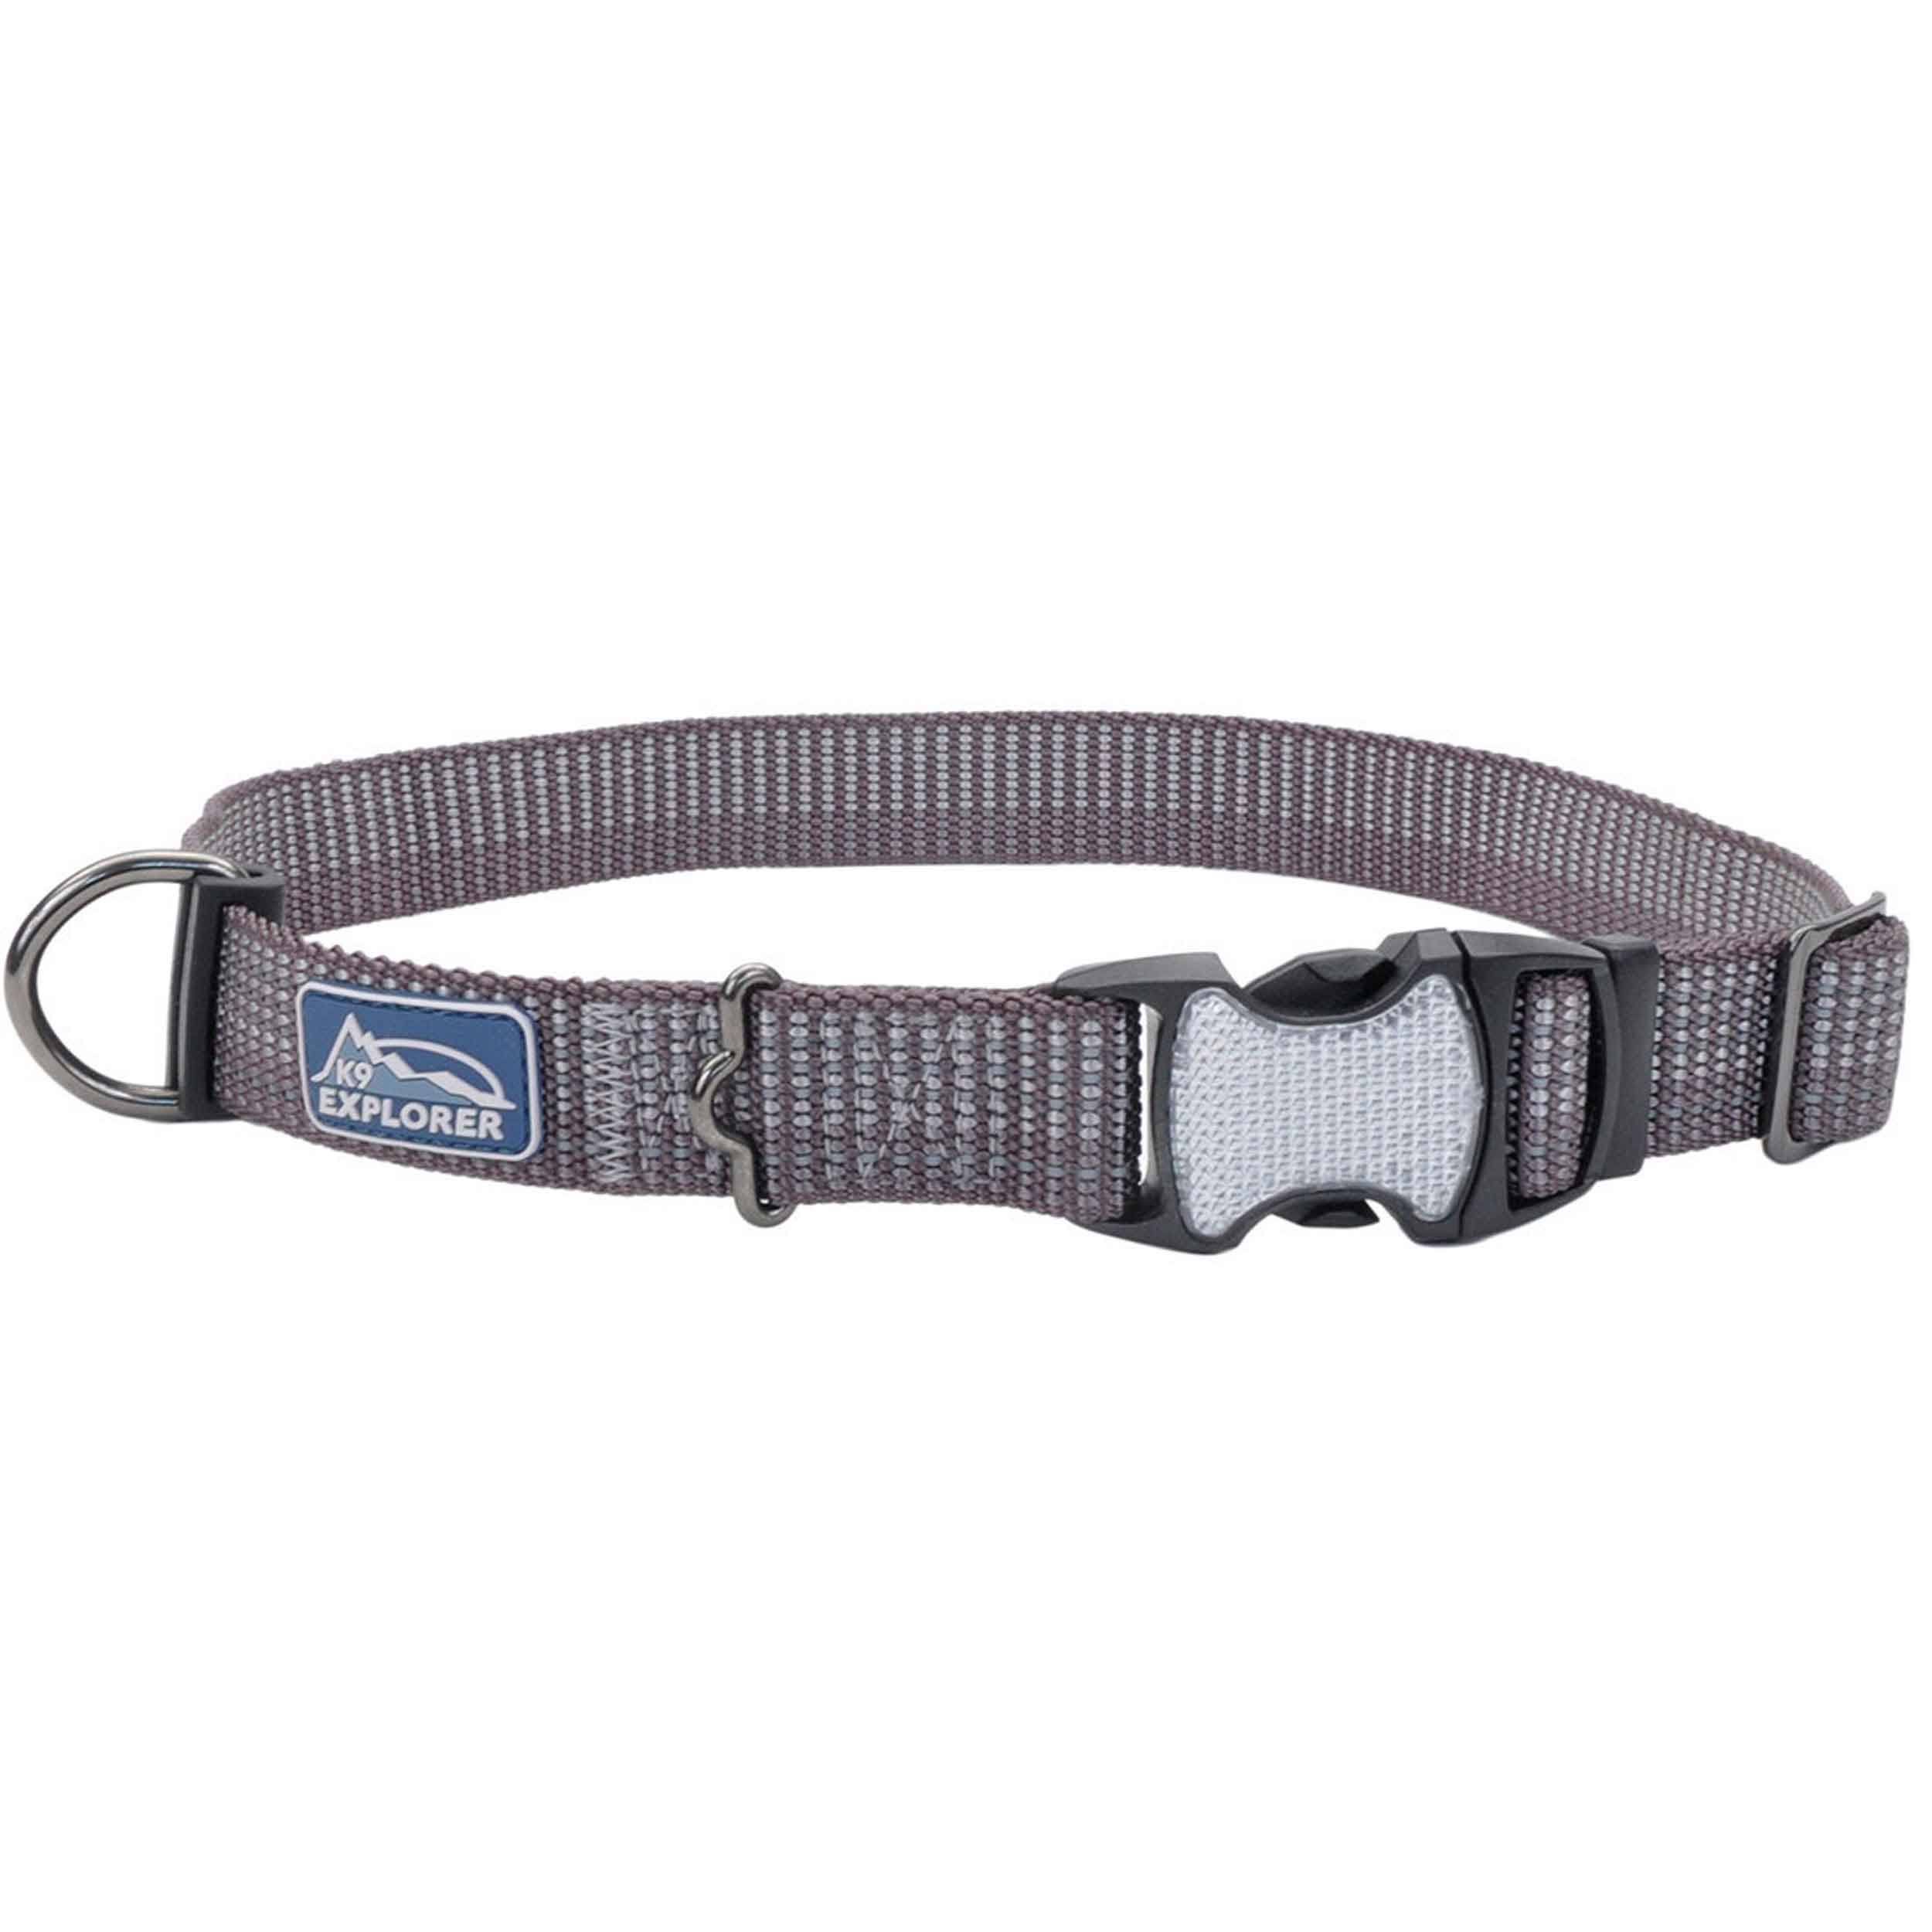 K9 Explorer Brights Reflective Adjustable Dog Collar, Mountain, 5/8-in x 10-14-in